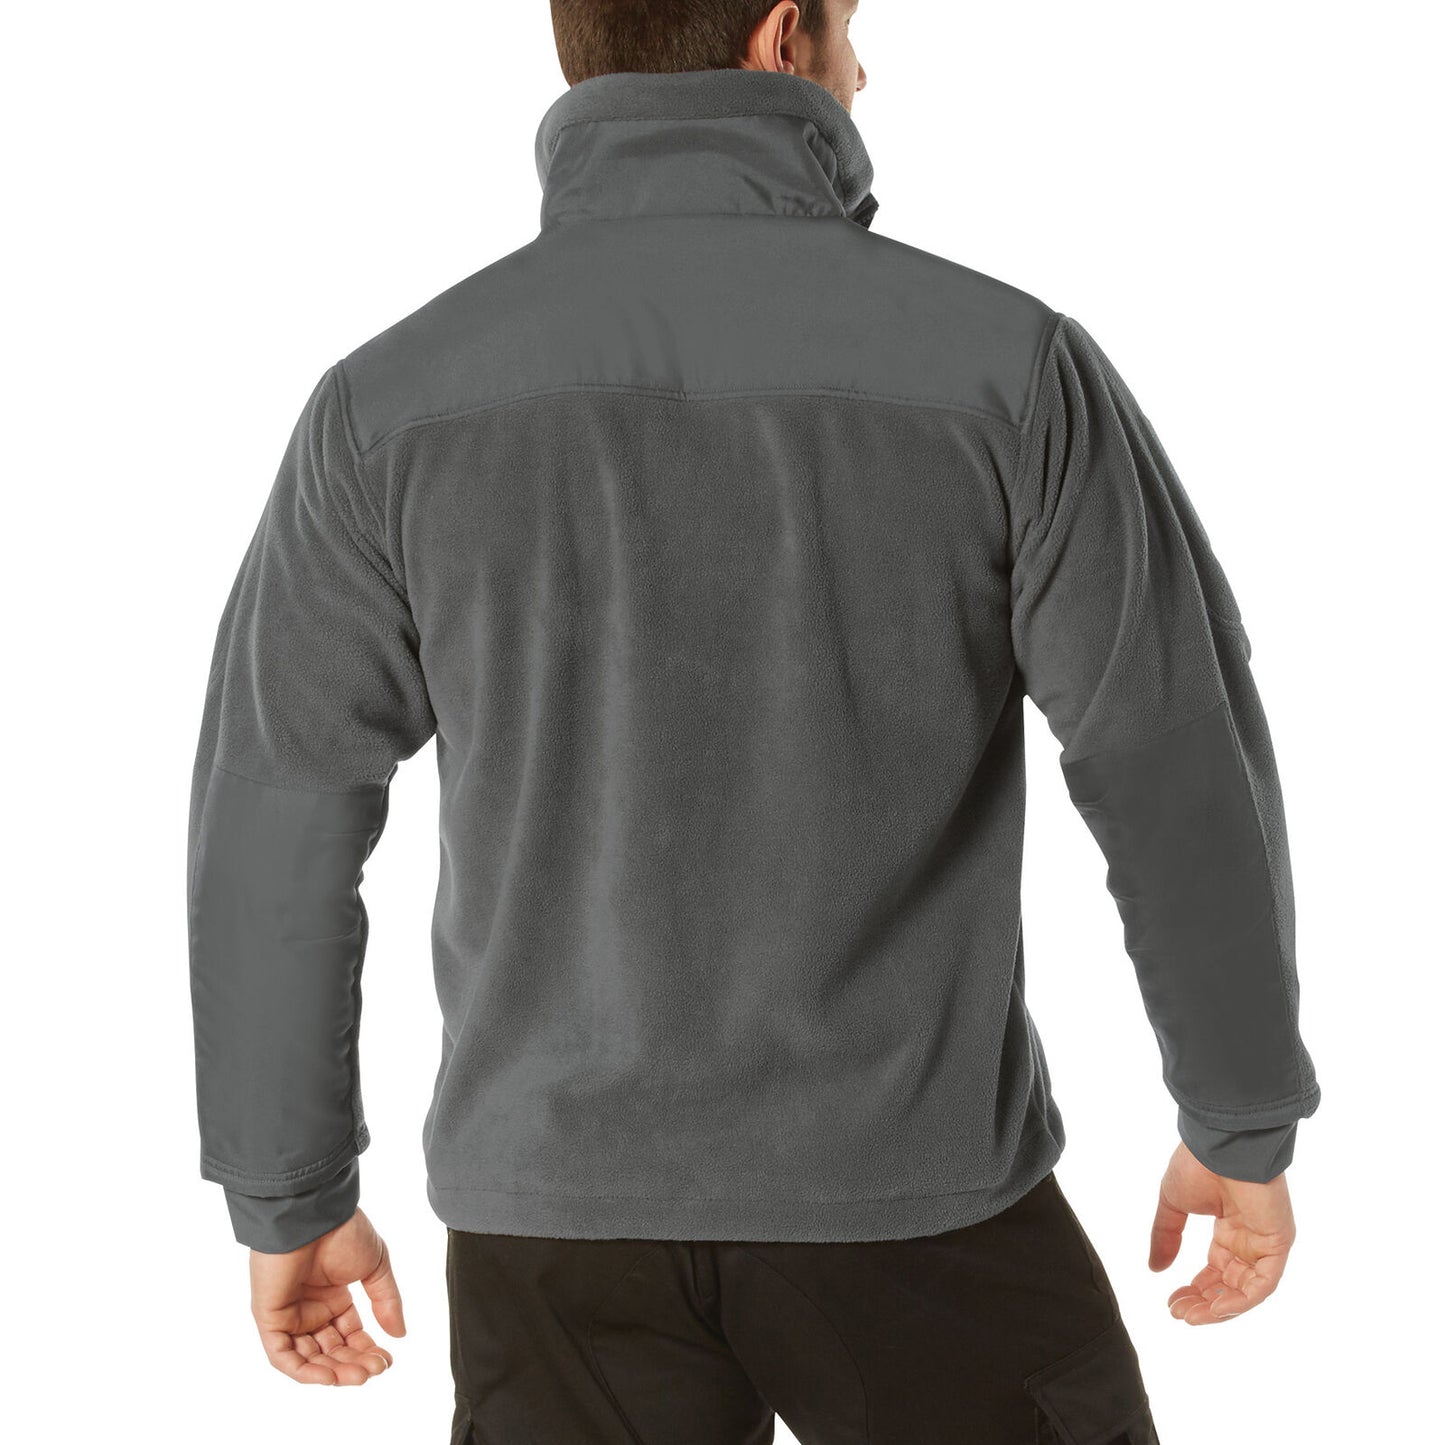 Men's Charcoal Grey Spec Ops Tactical Fleece Jacket With Thermal Insulation